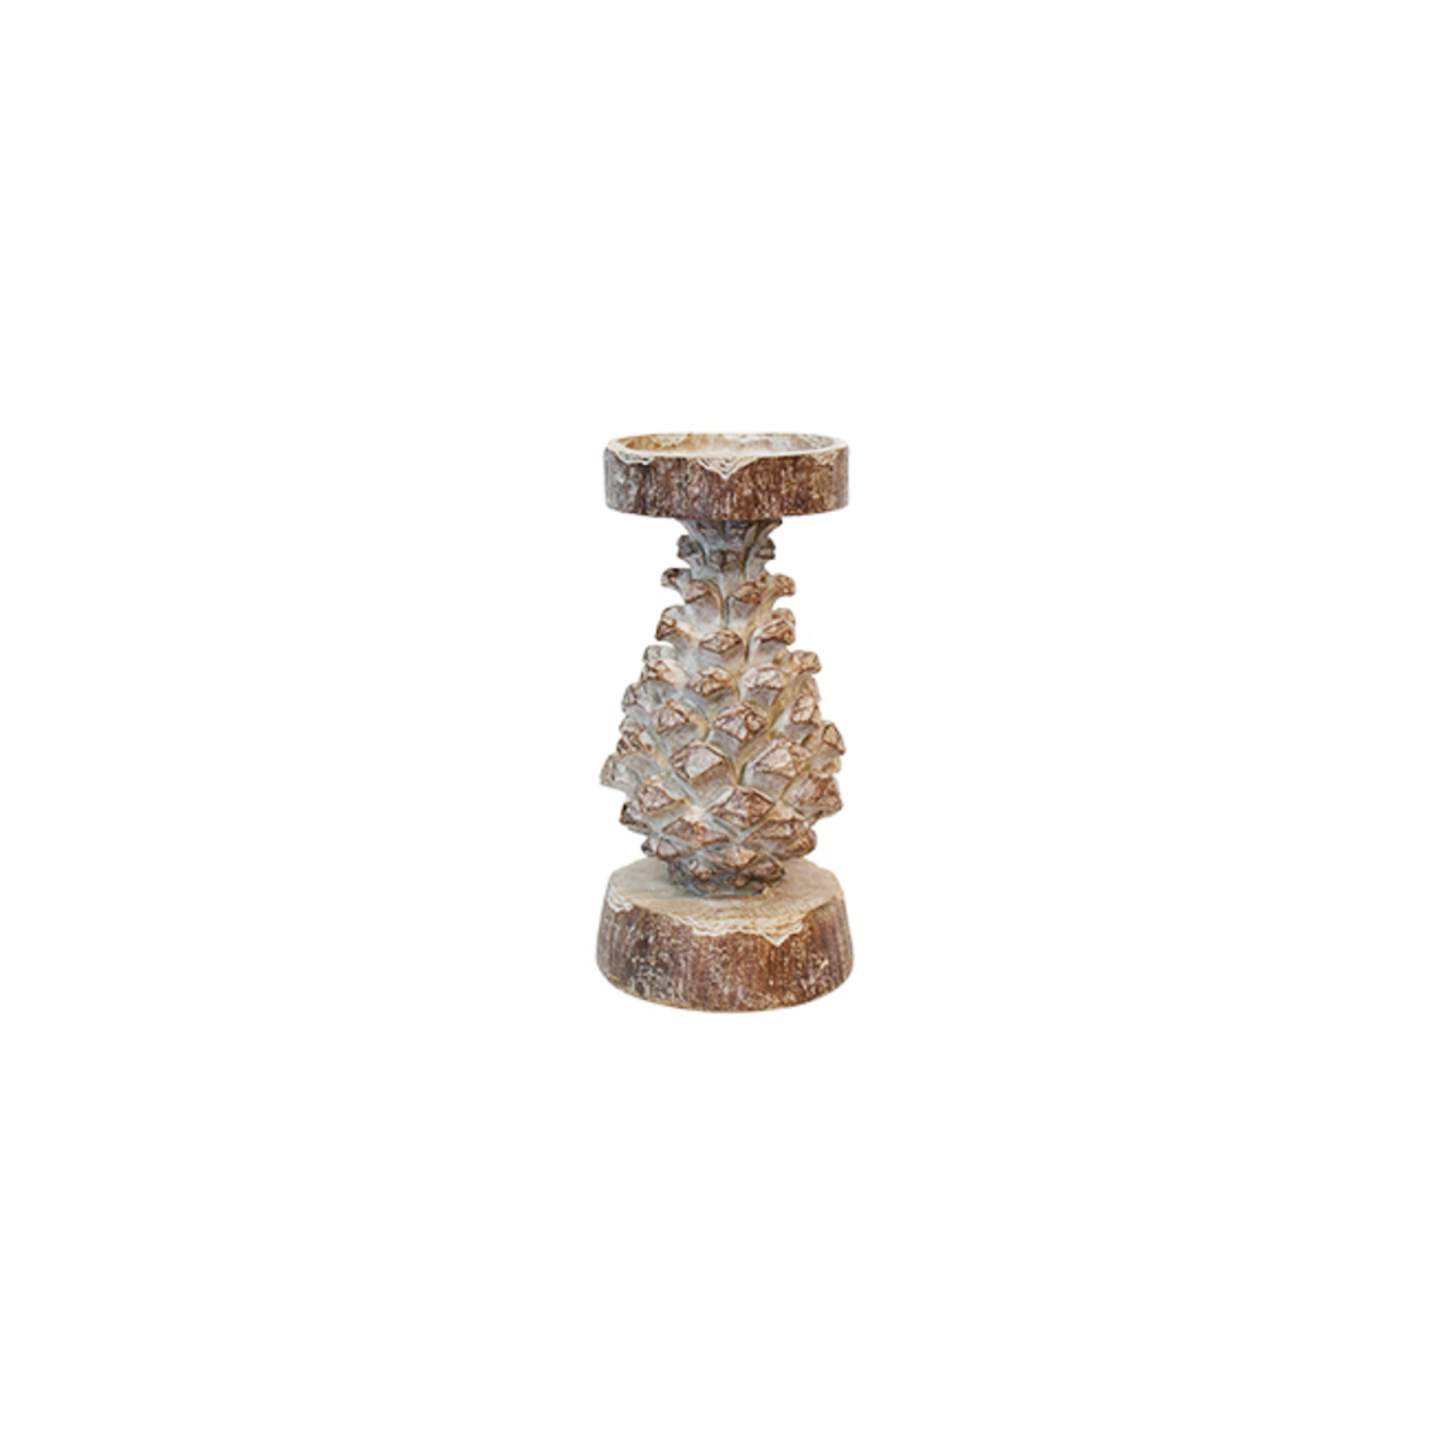 PINECONE CANDLE HOLDER - SMALL